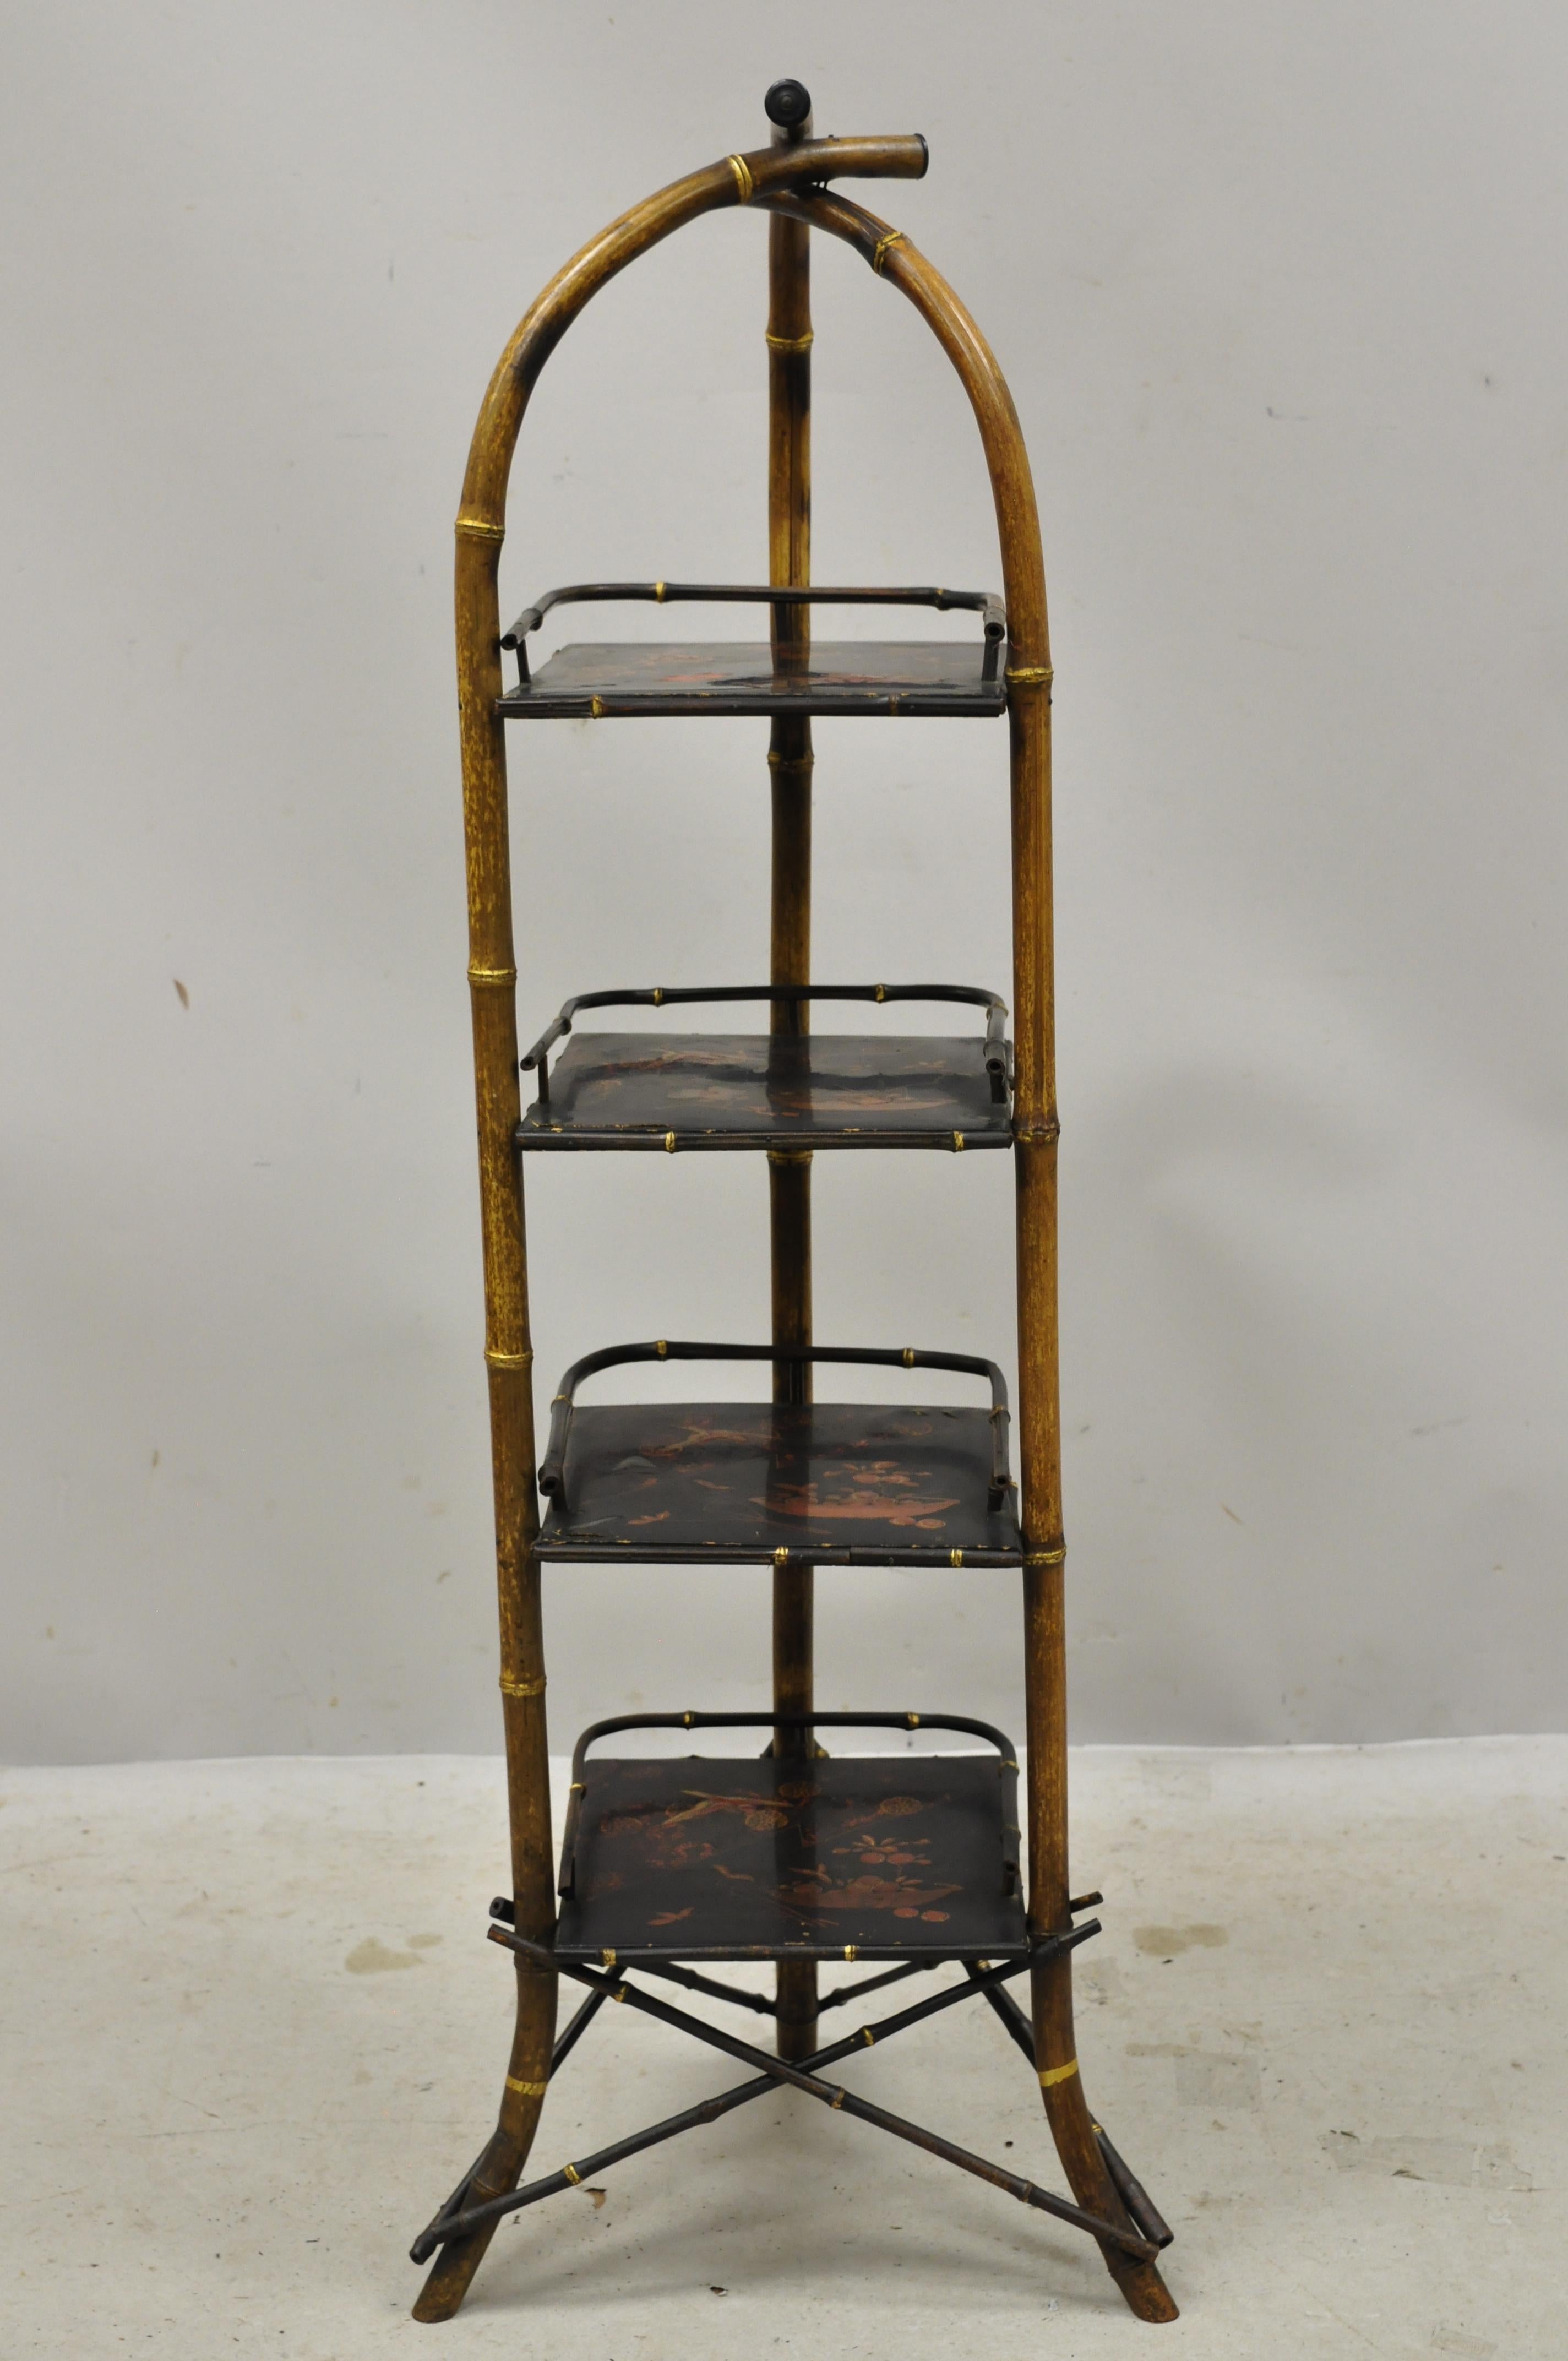 Antique English charred bamboo Victorian 4-tier muffin dessert pastry stand. Item features bent bamboo frame, charred/burnt finish, lacquered surface with bird accents, 4 tiers, very nice antique item, circa late 19th-early 20th century.